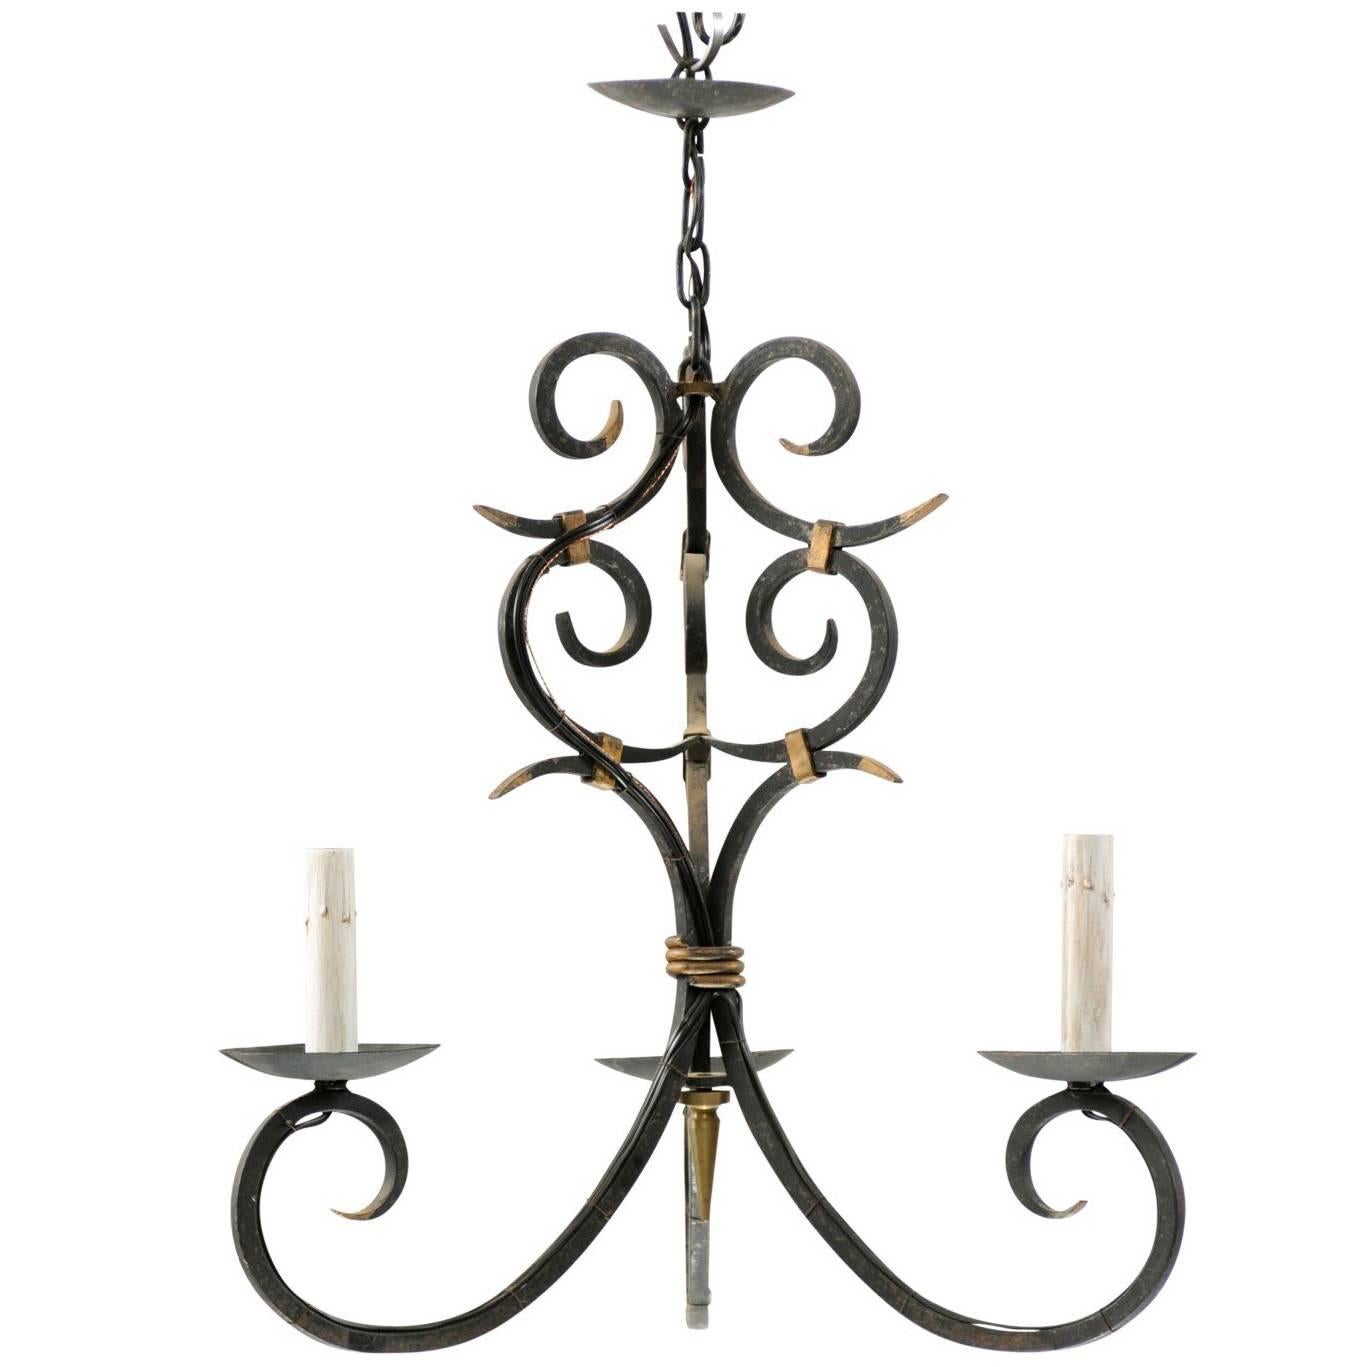 French Forged Iron Three-Light Chandelier with Scrolled Arms and Gilded Accents